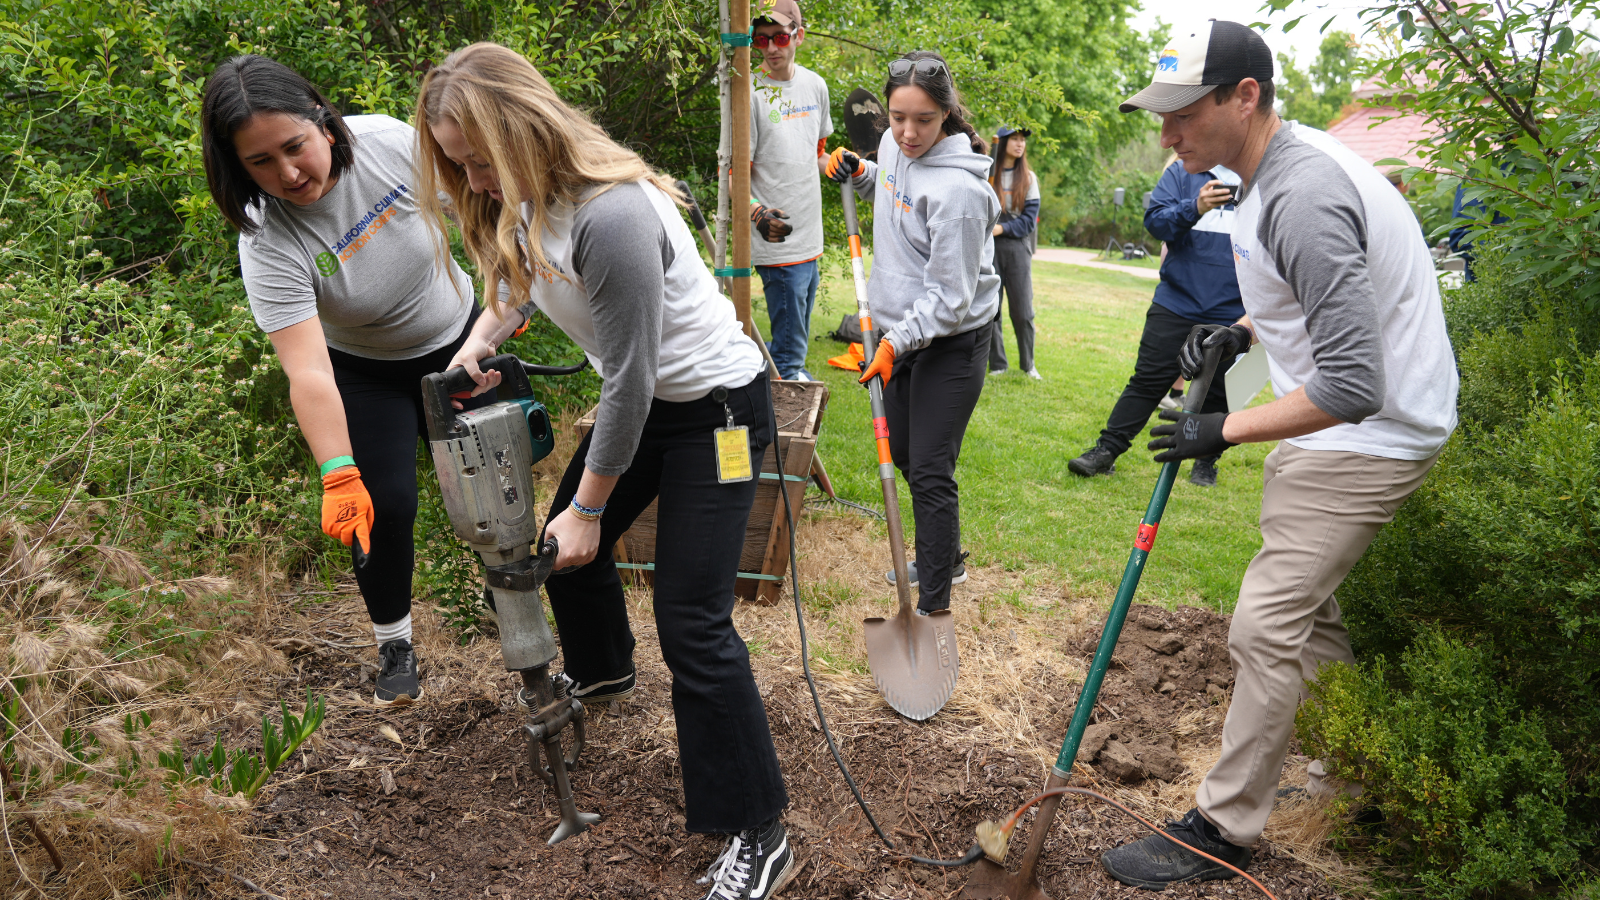 Digging to plant trees - Climate Action in San Diego County